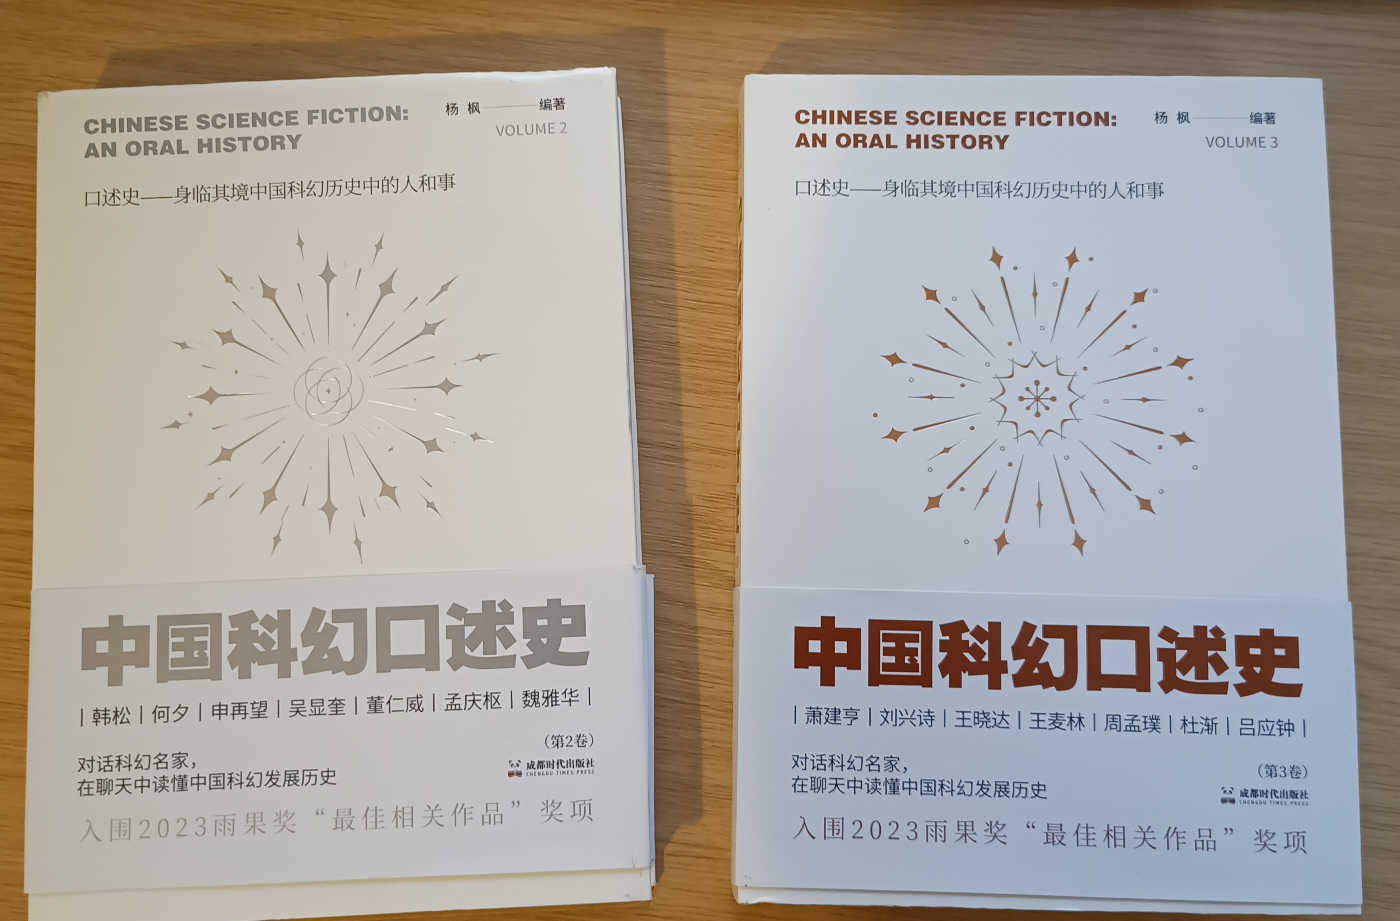 The covers of Chinese SF: An Oral History - Volumes 2 and 3